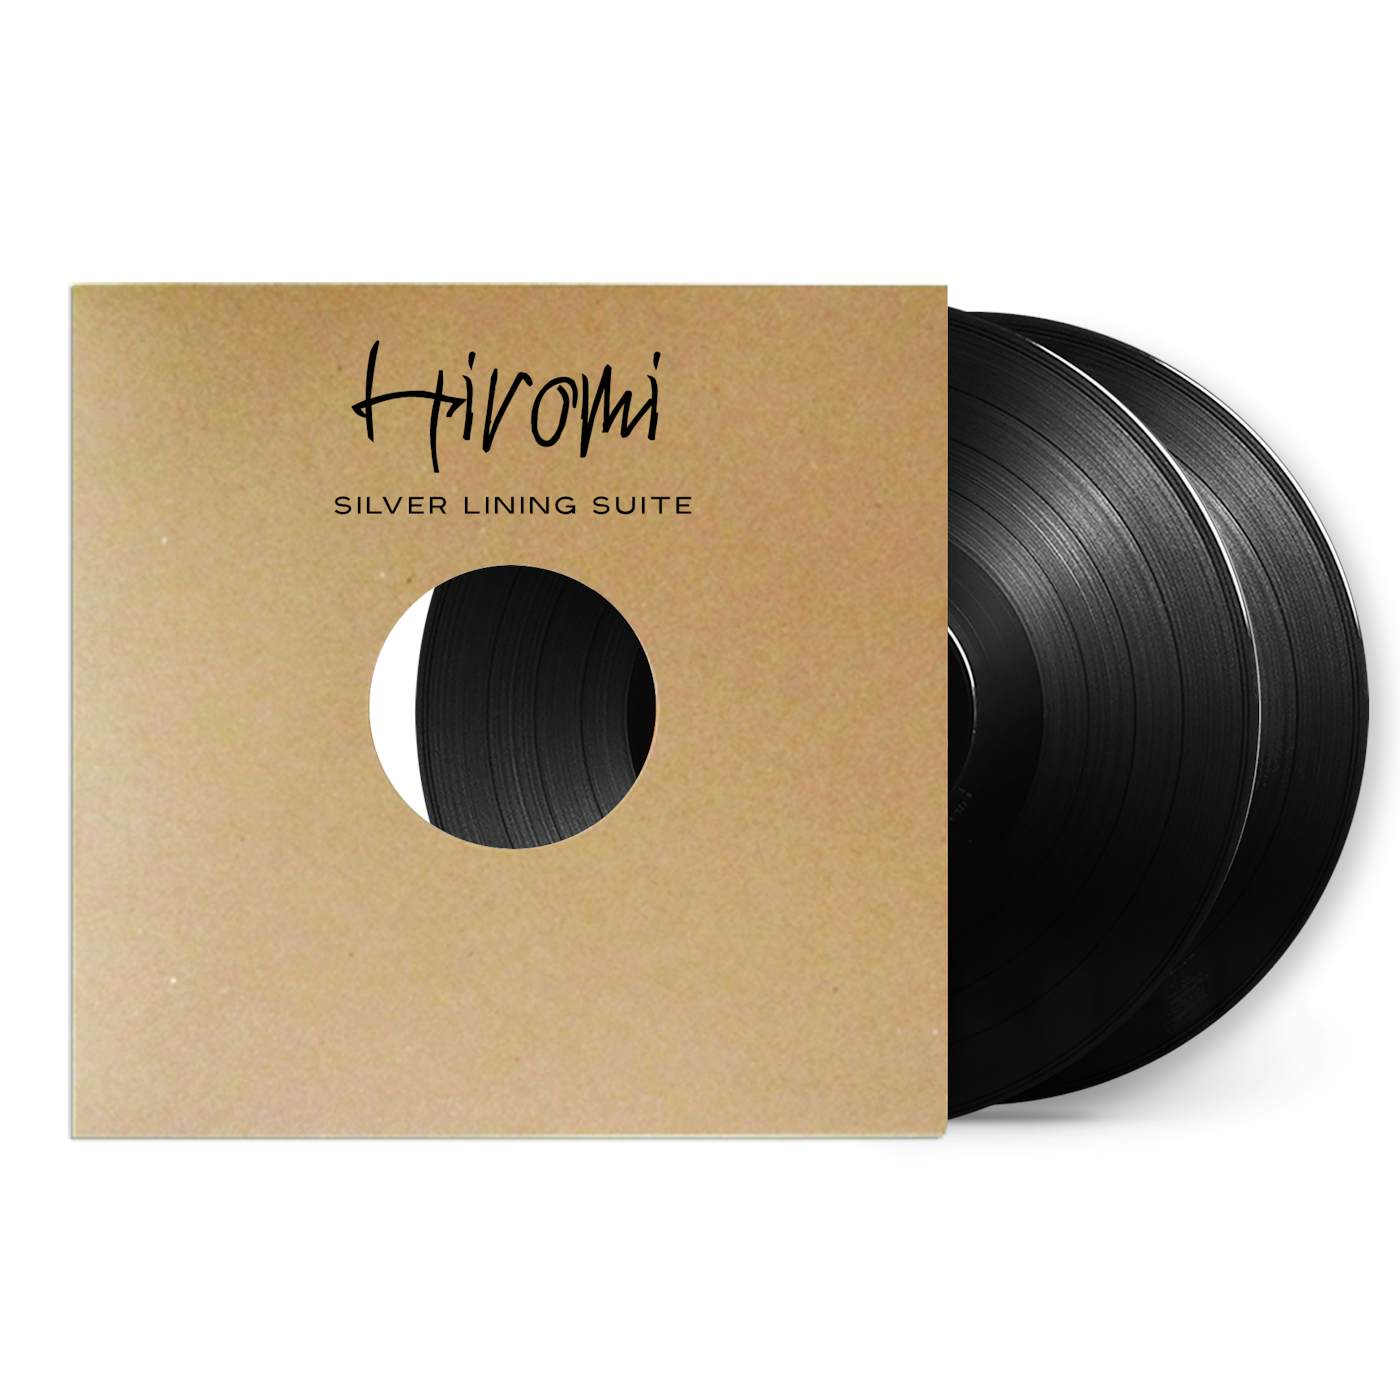 Hiromi "Silver Lining Suite" SIGNED & NUMBERED 2xLP Test Pressing (Only 50 Available Worldwide) (Vinyl)